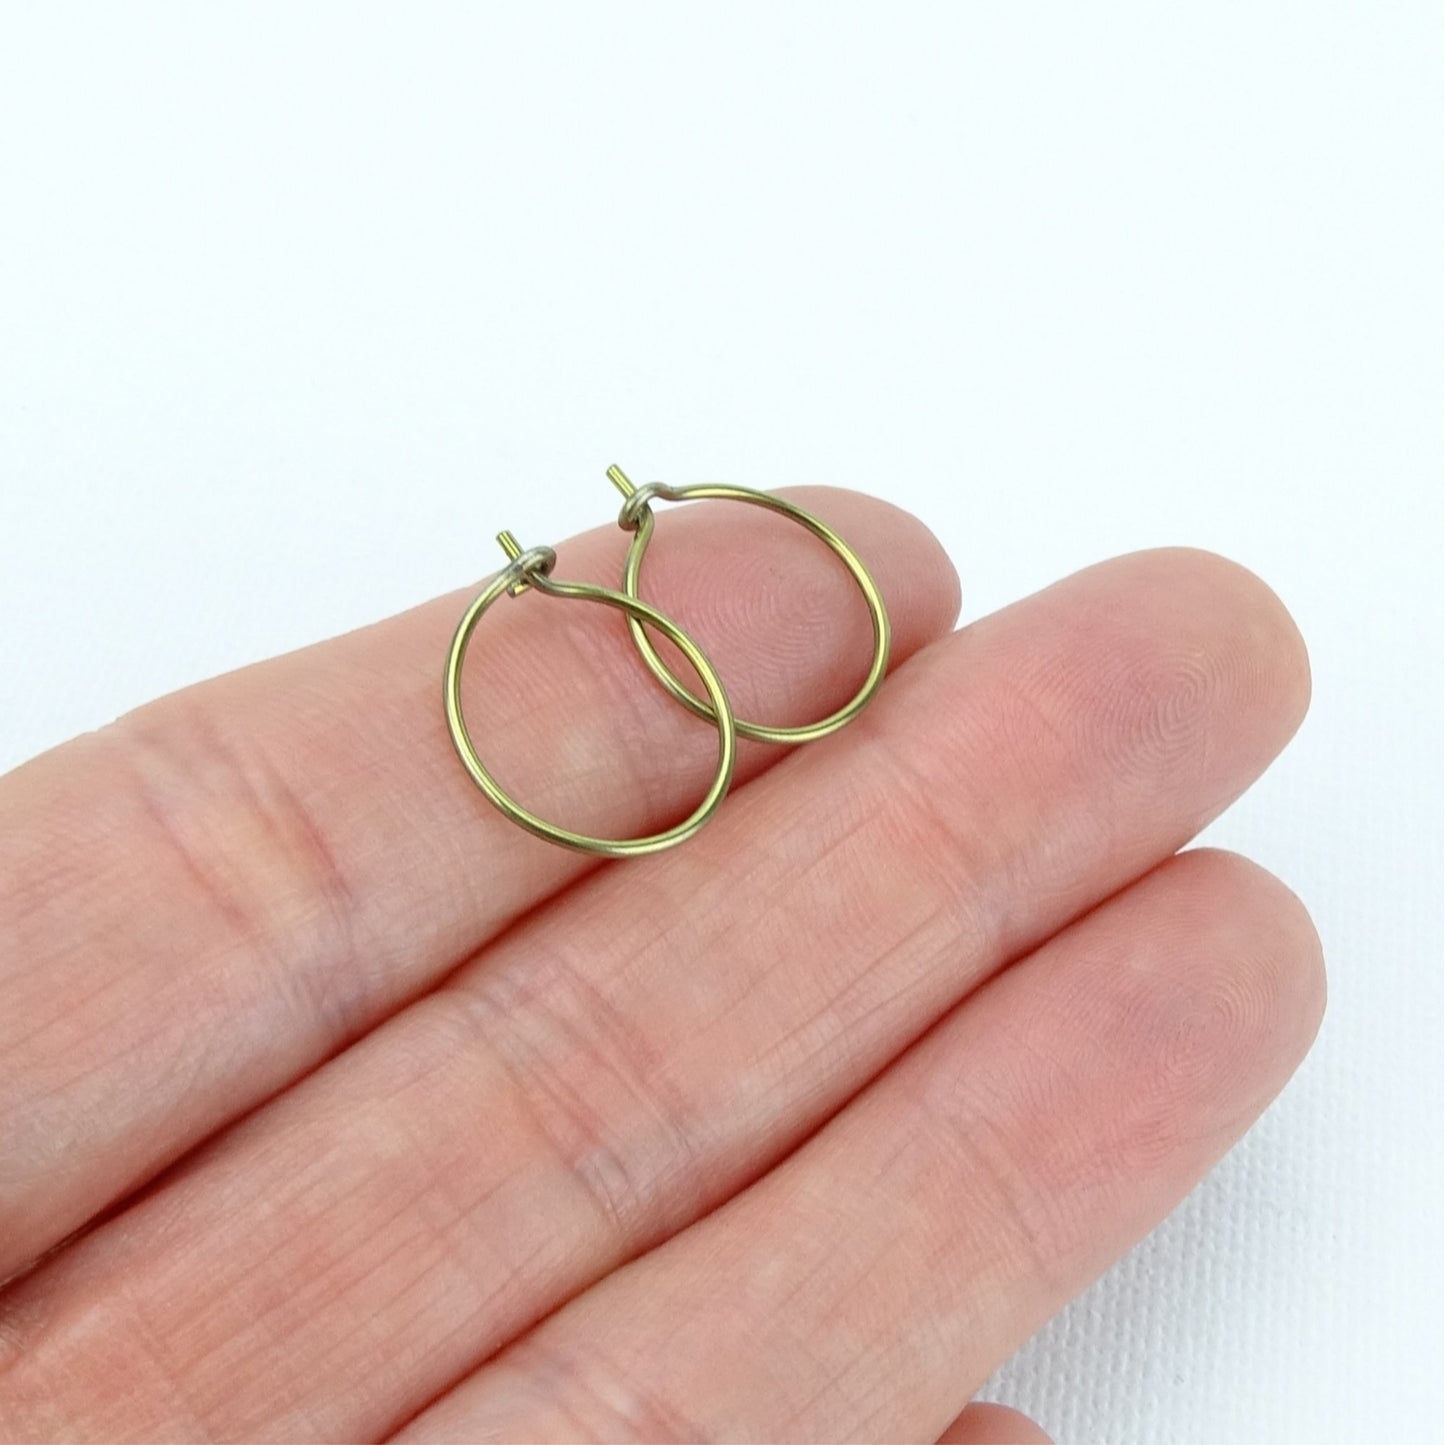 Small Gold Niobium Hoops for Sensitive Ears, Hypoallergenic Nickel Free Hoop Earrings, Yellow Gold Anodized